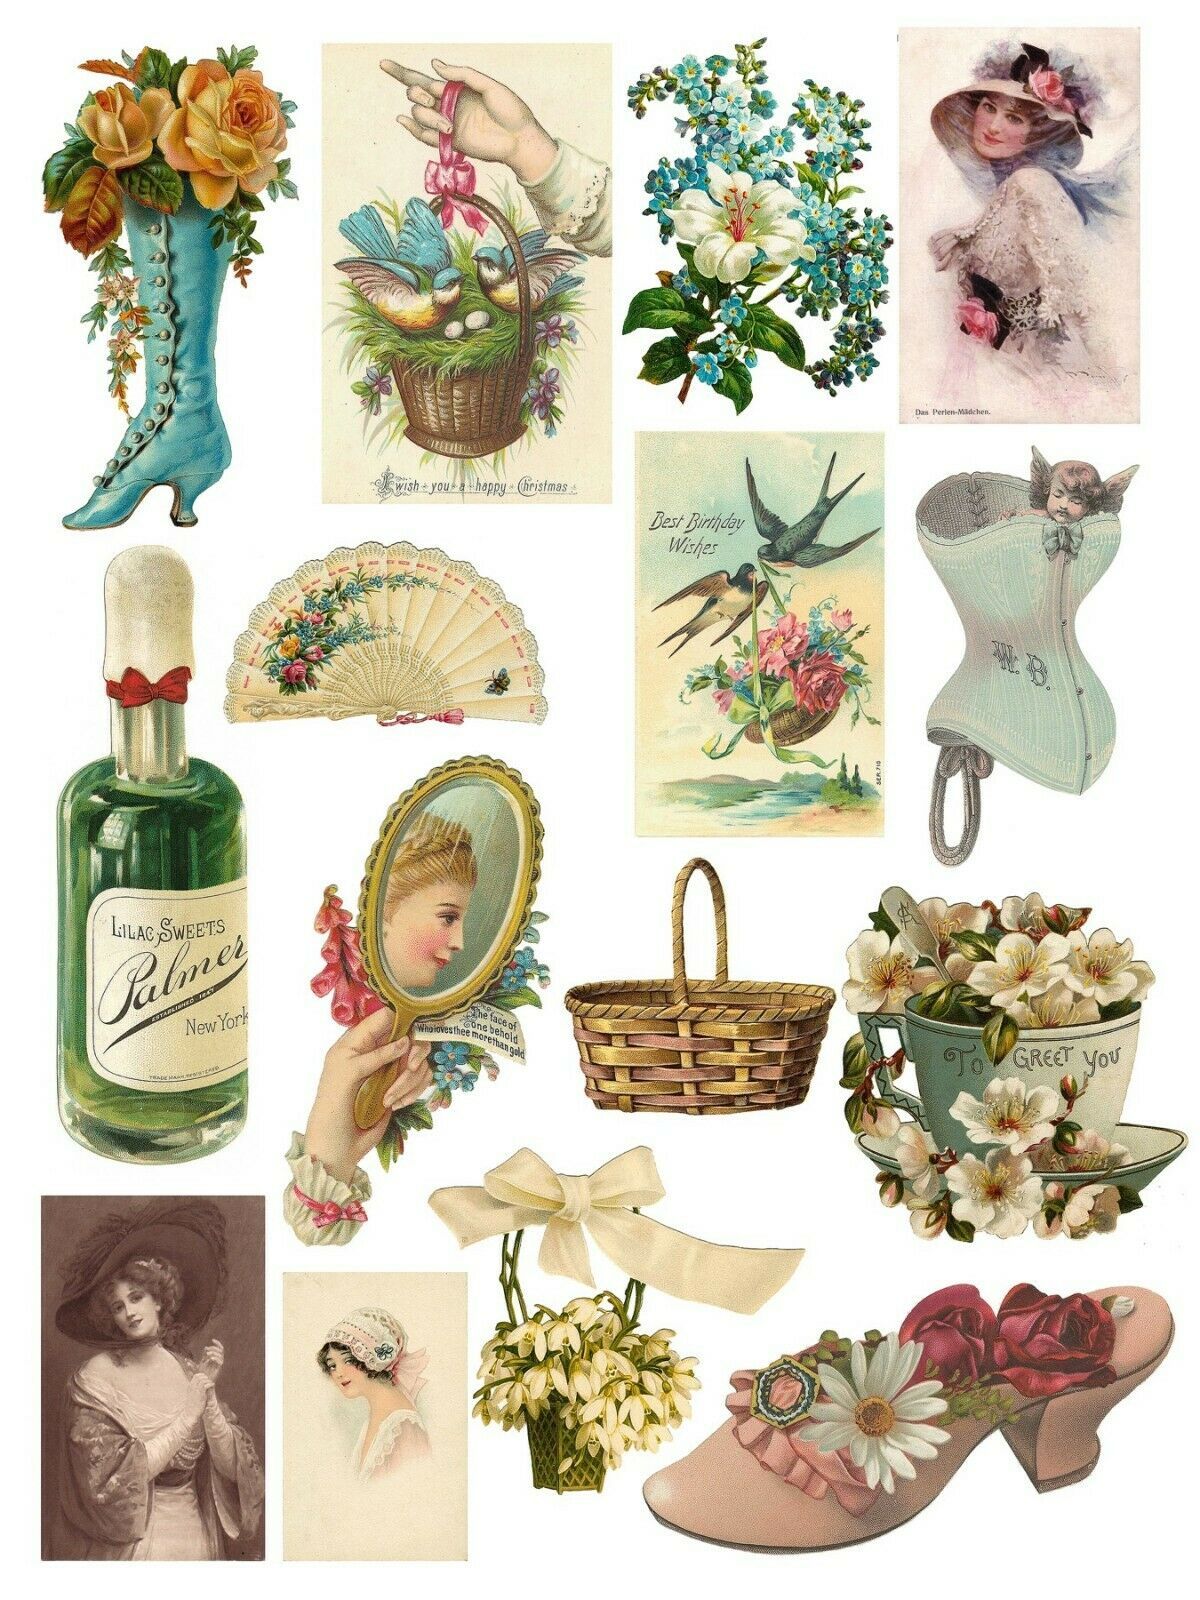 4081.Victorian Women's beauty products, flowers, perfumes.POSTER.Wall art decor - $13.86 - $49.50